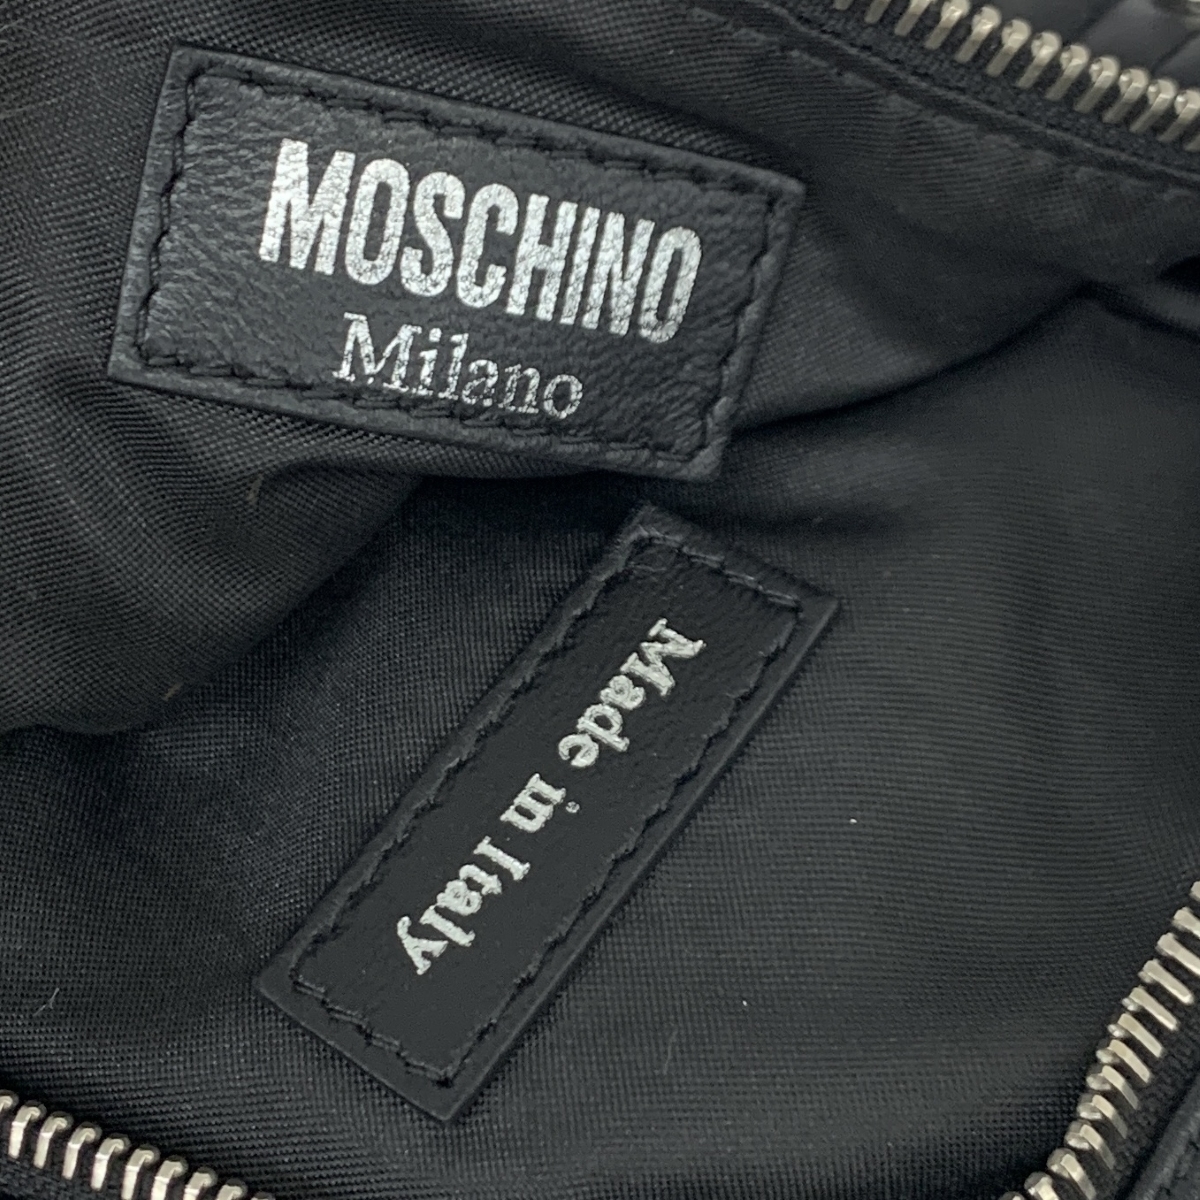  excellent *MOSCHINO Moschino shoulder bag * black leather Rider's type studs lady's Italy made diagonal ..bag bag 